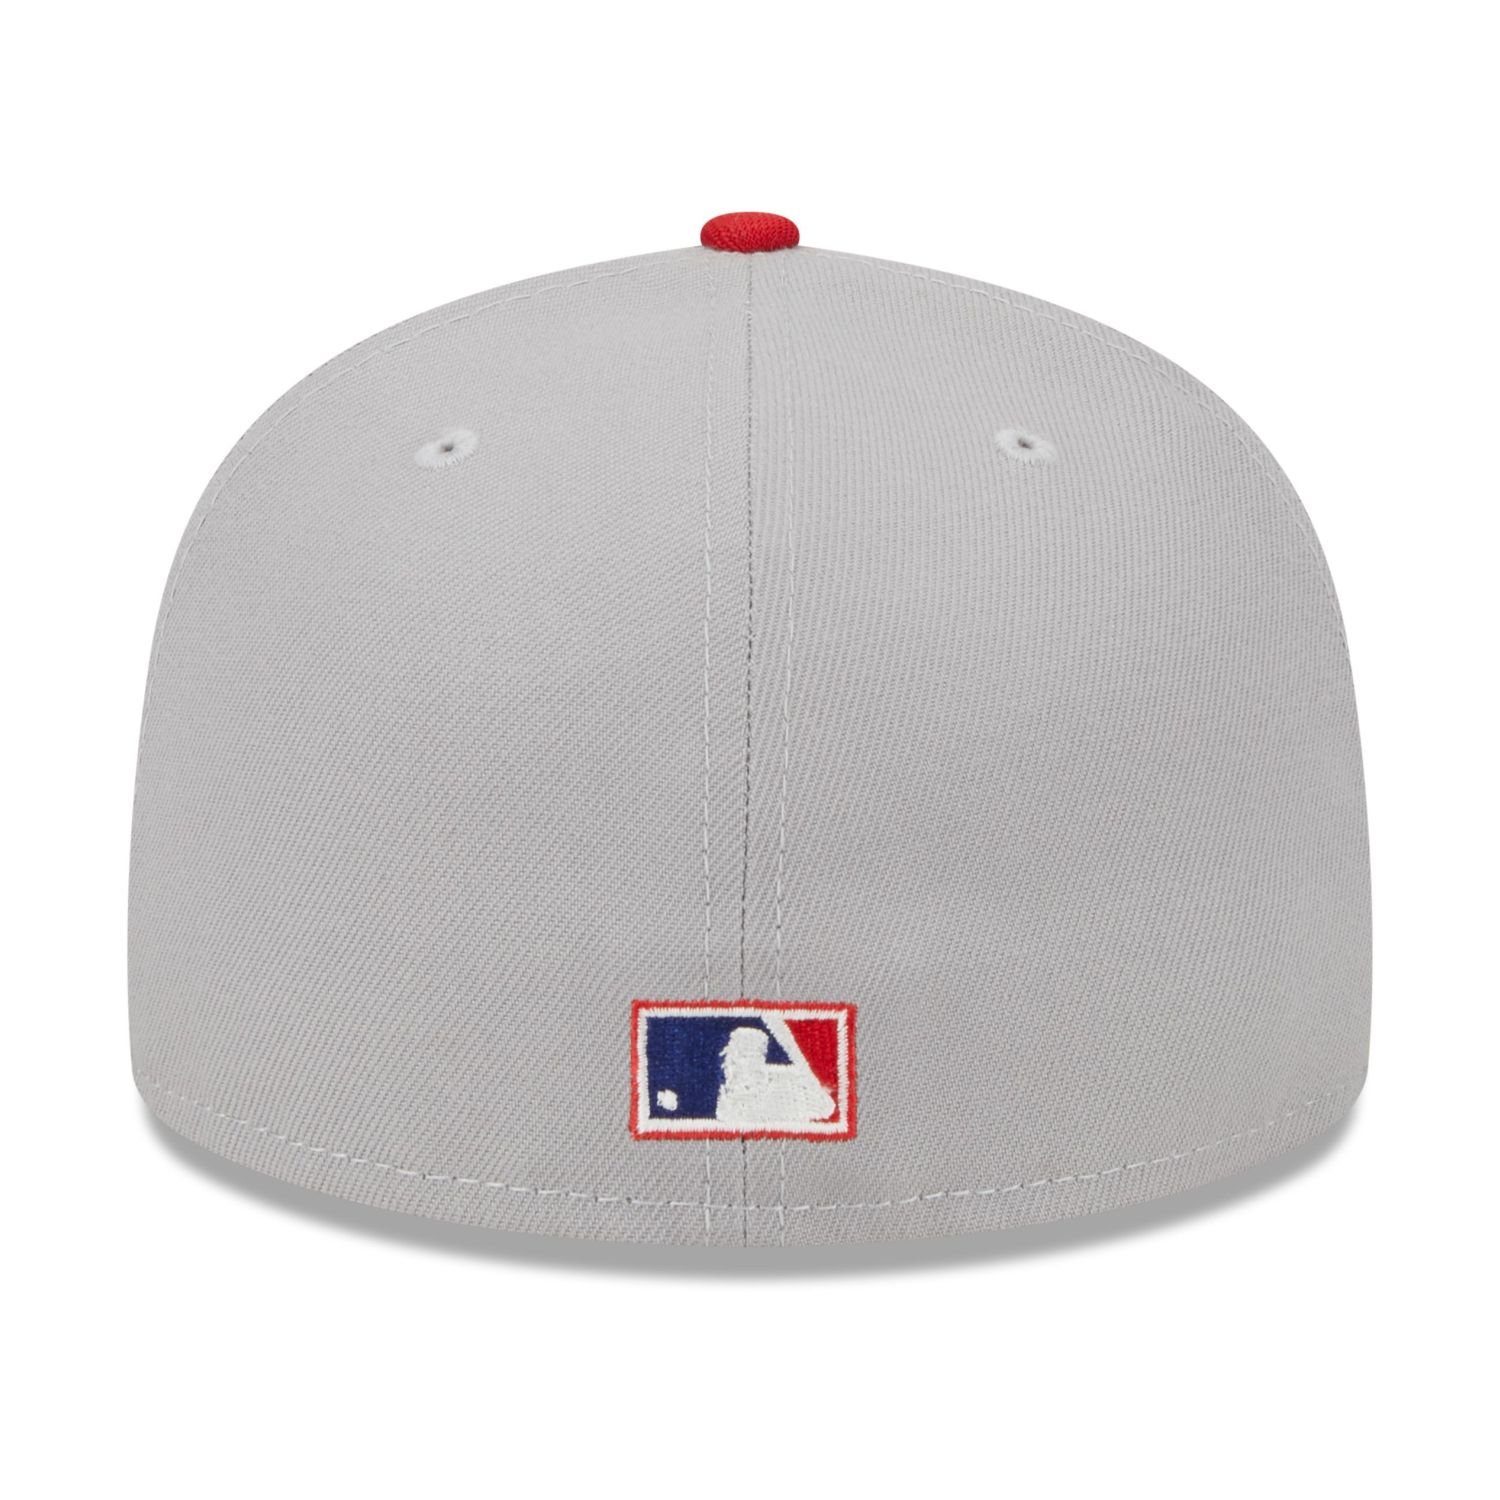 New Cardinals RETRO Era Fitted Cap St. Louis 59Fifty